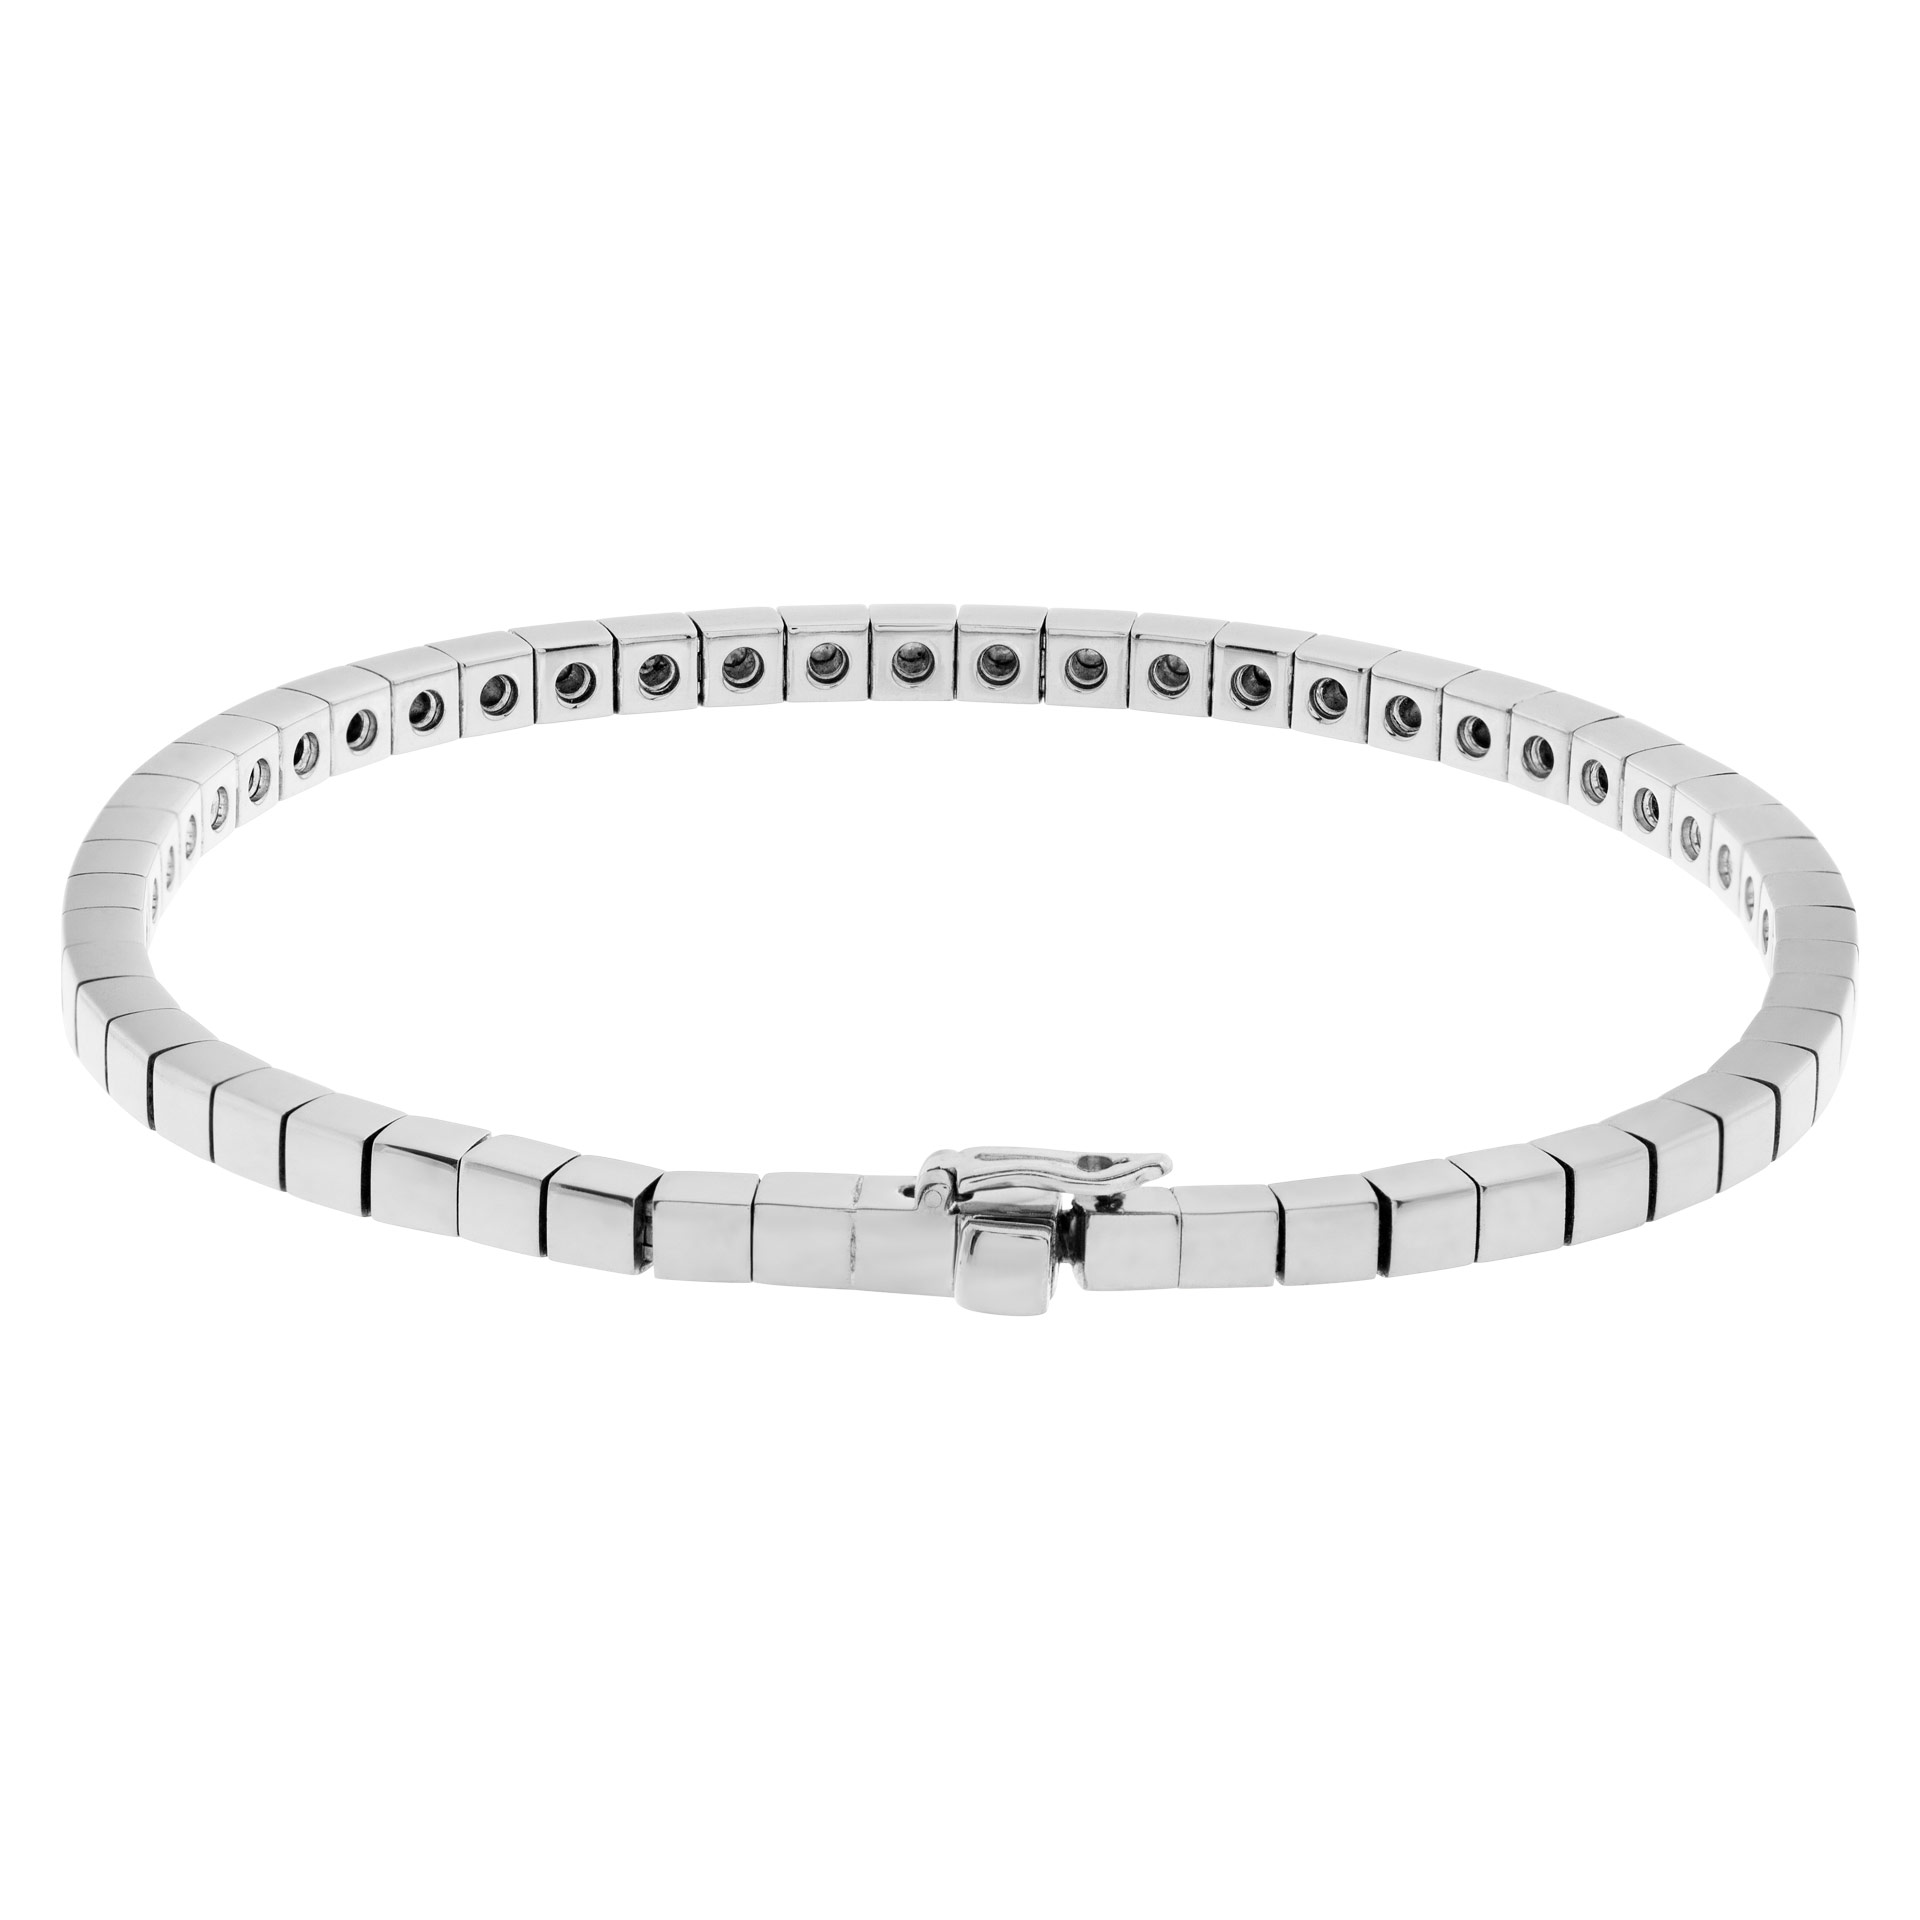 Cartier Lanieres bracelet in 18k white gold. 6.5 inches long. image 4